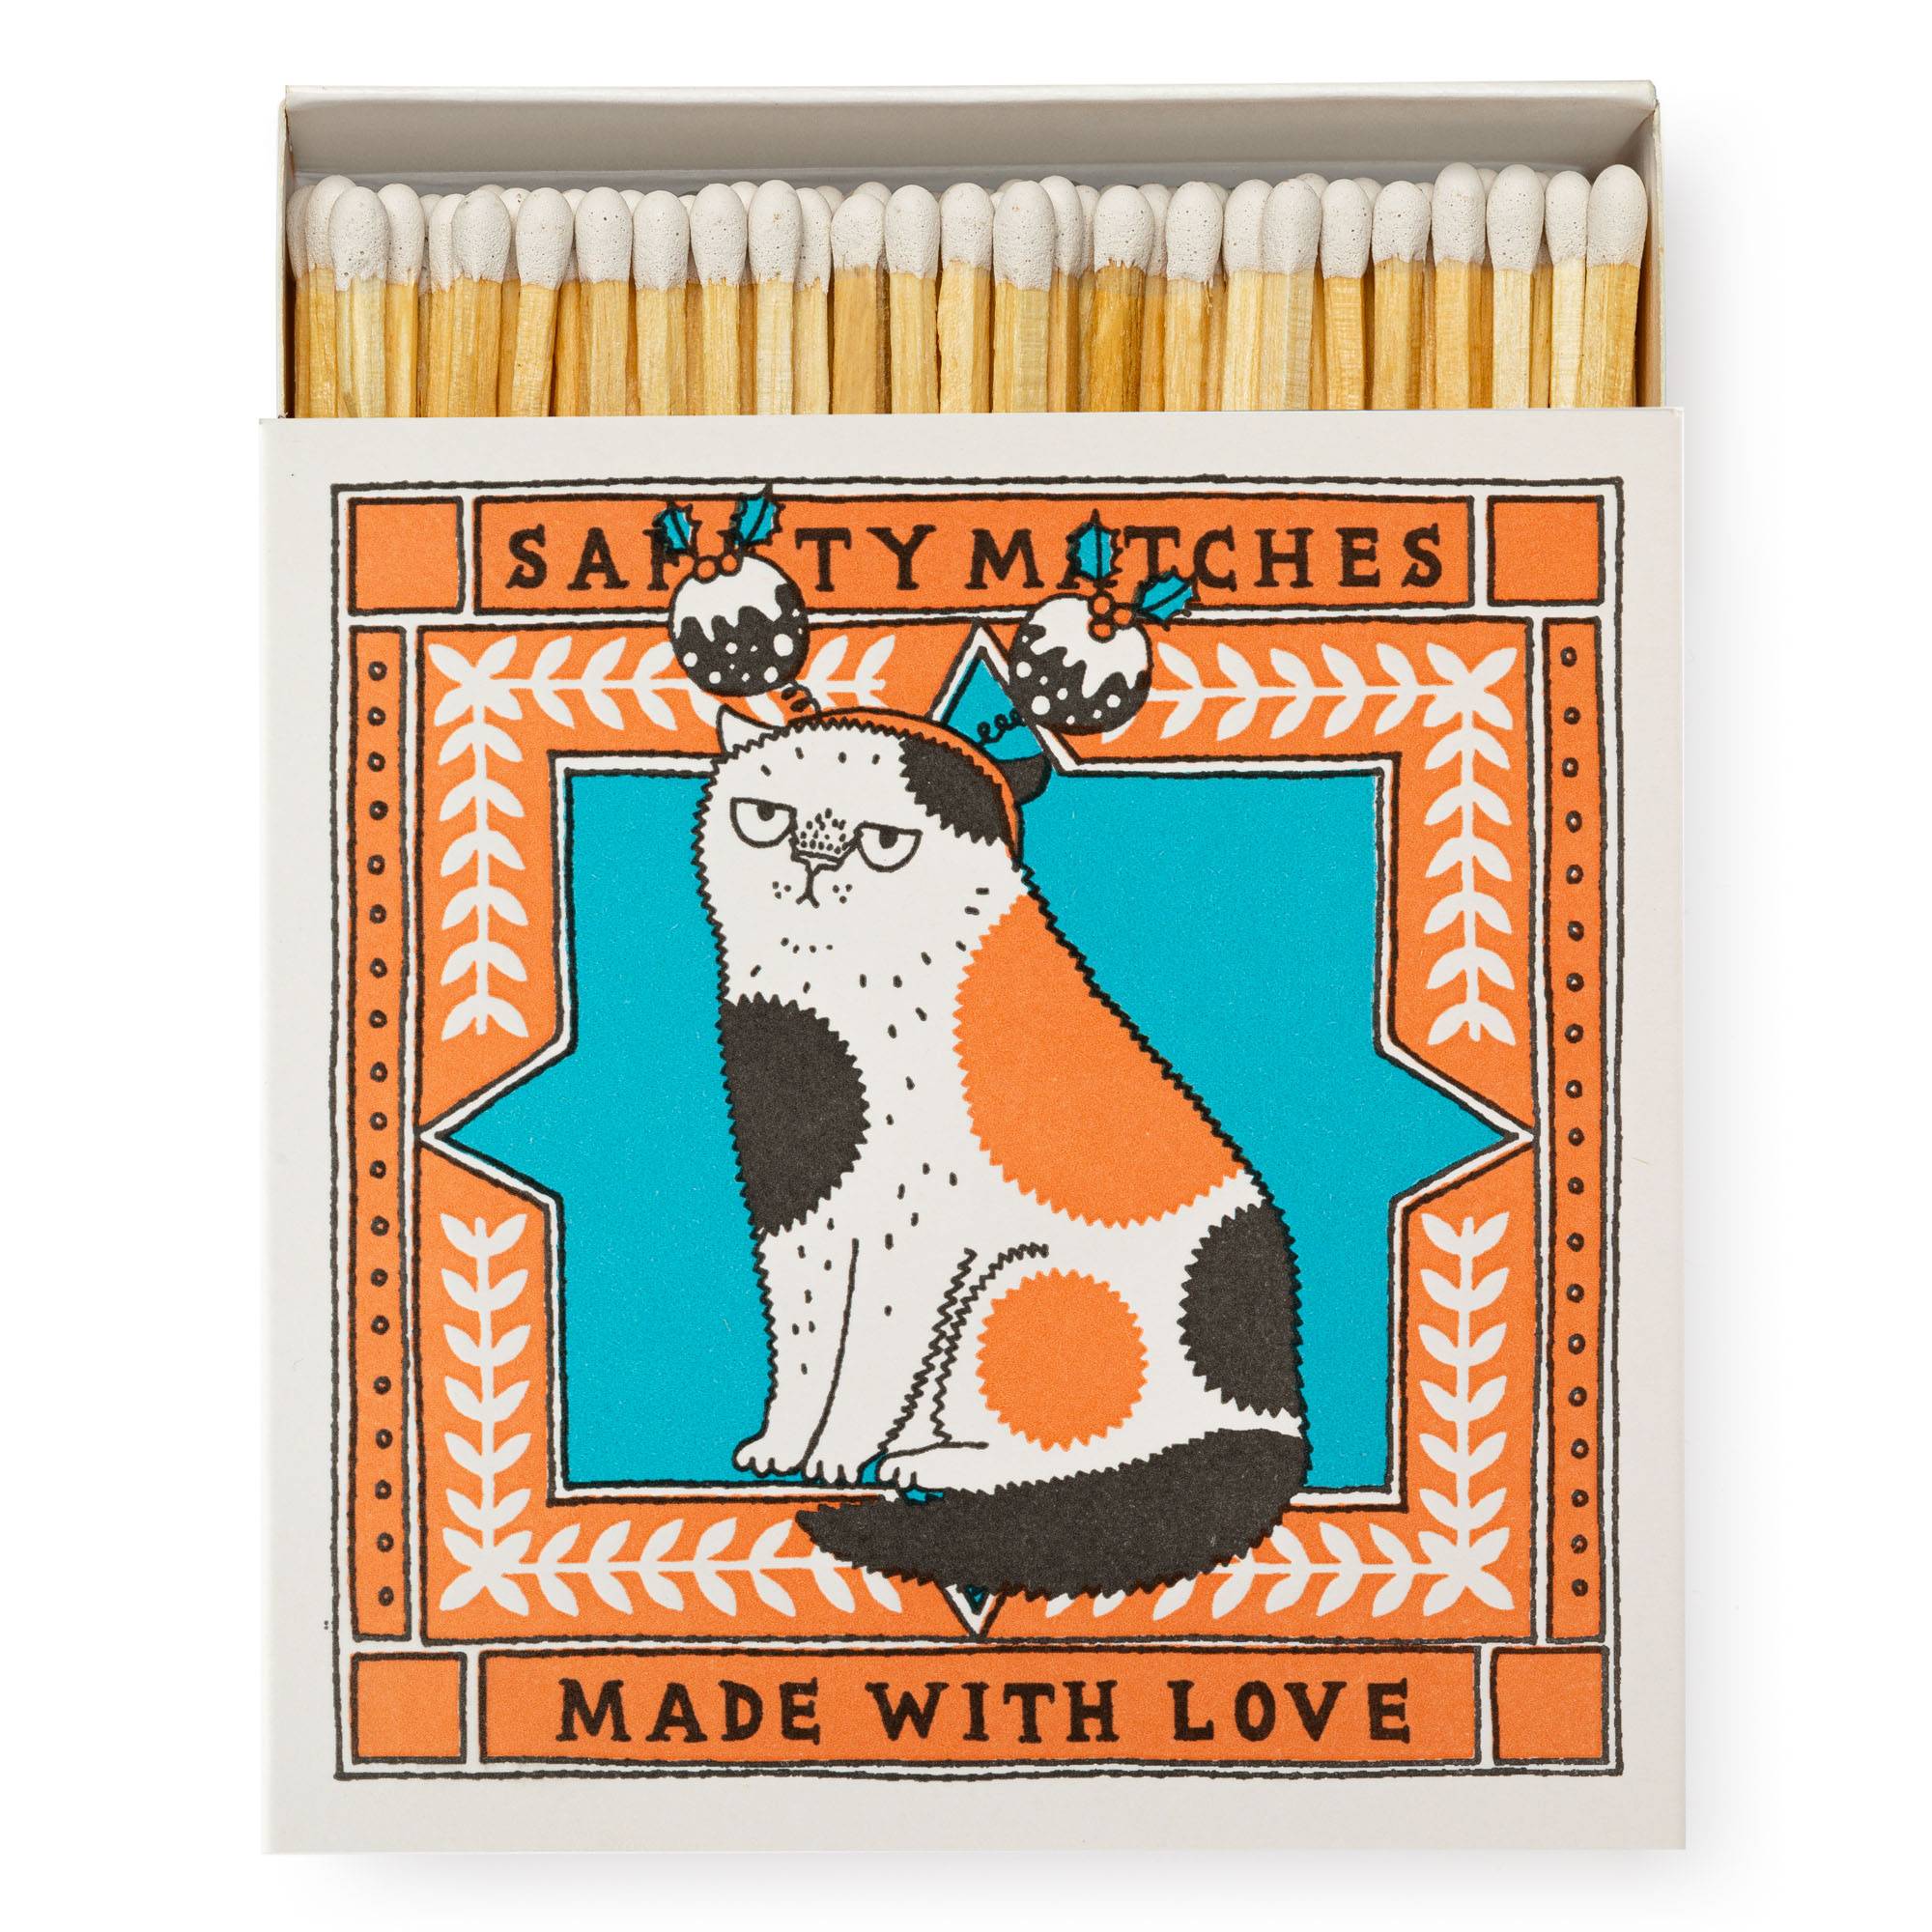 Christmas Cat Matches - Square Matchboxes - Charlotte Farmer - from Archivist Gallery 